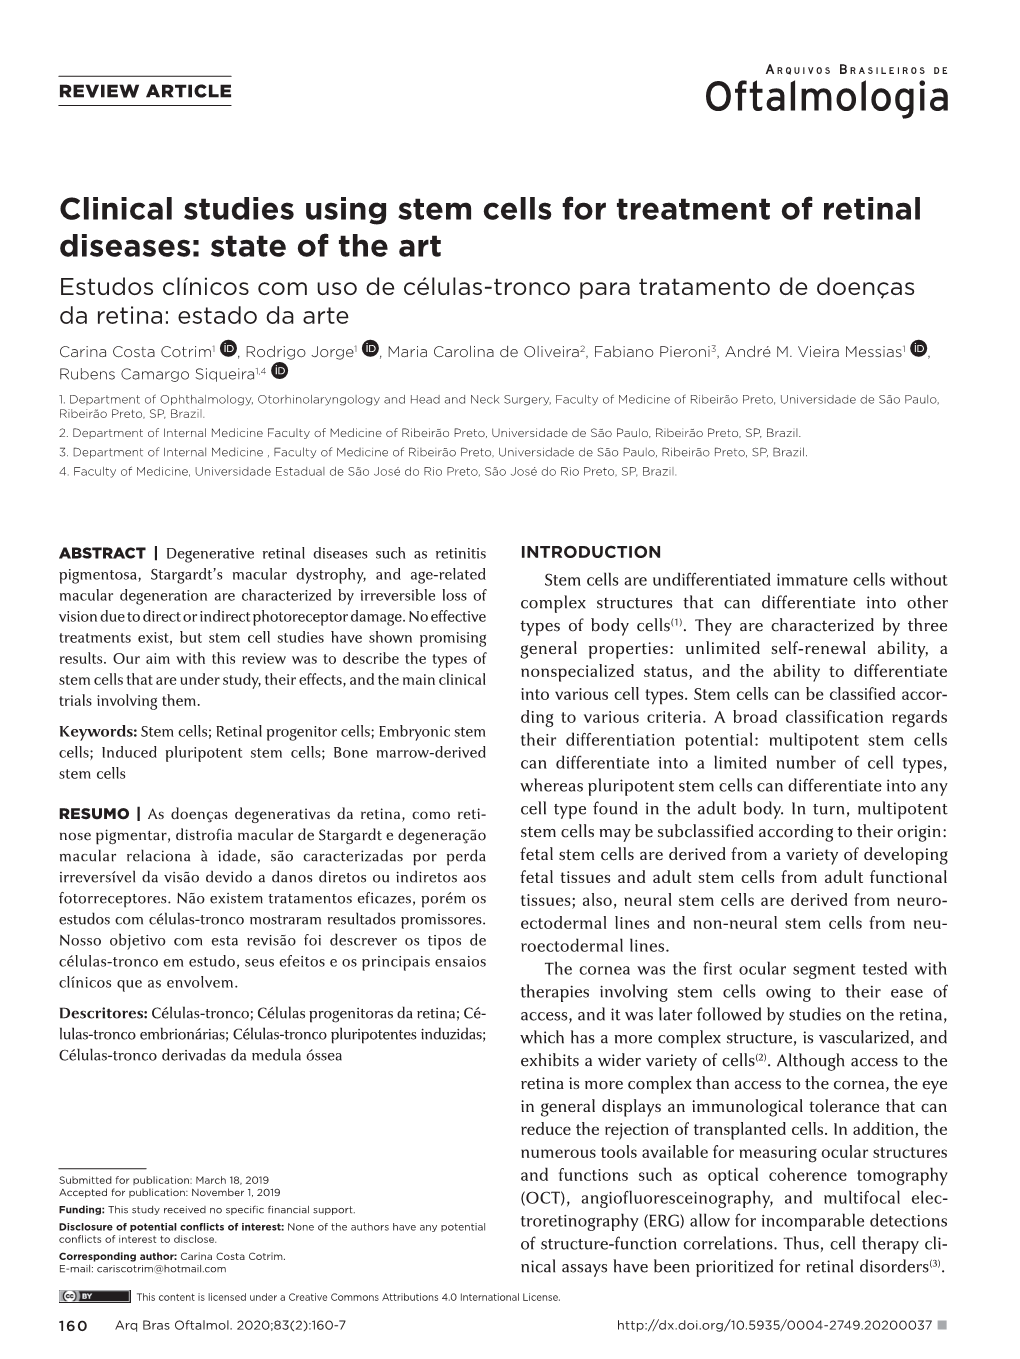 Clinical Studies Using Stem Cells for Treatment of Retinal Diseases